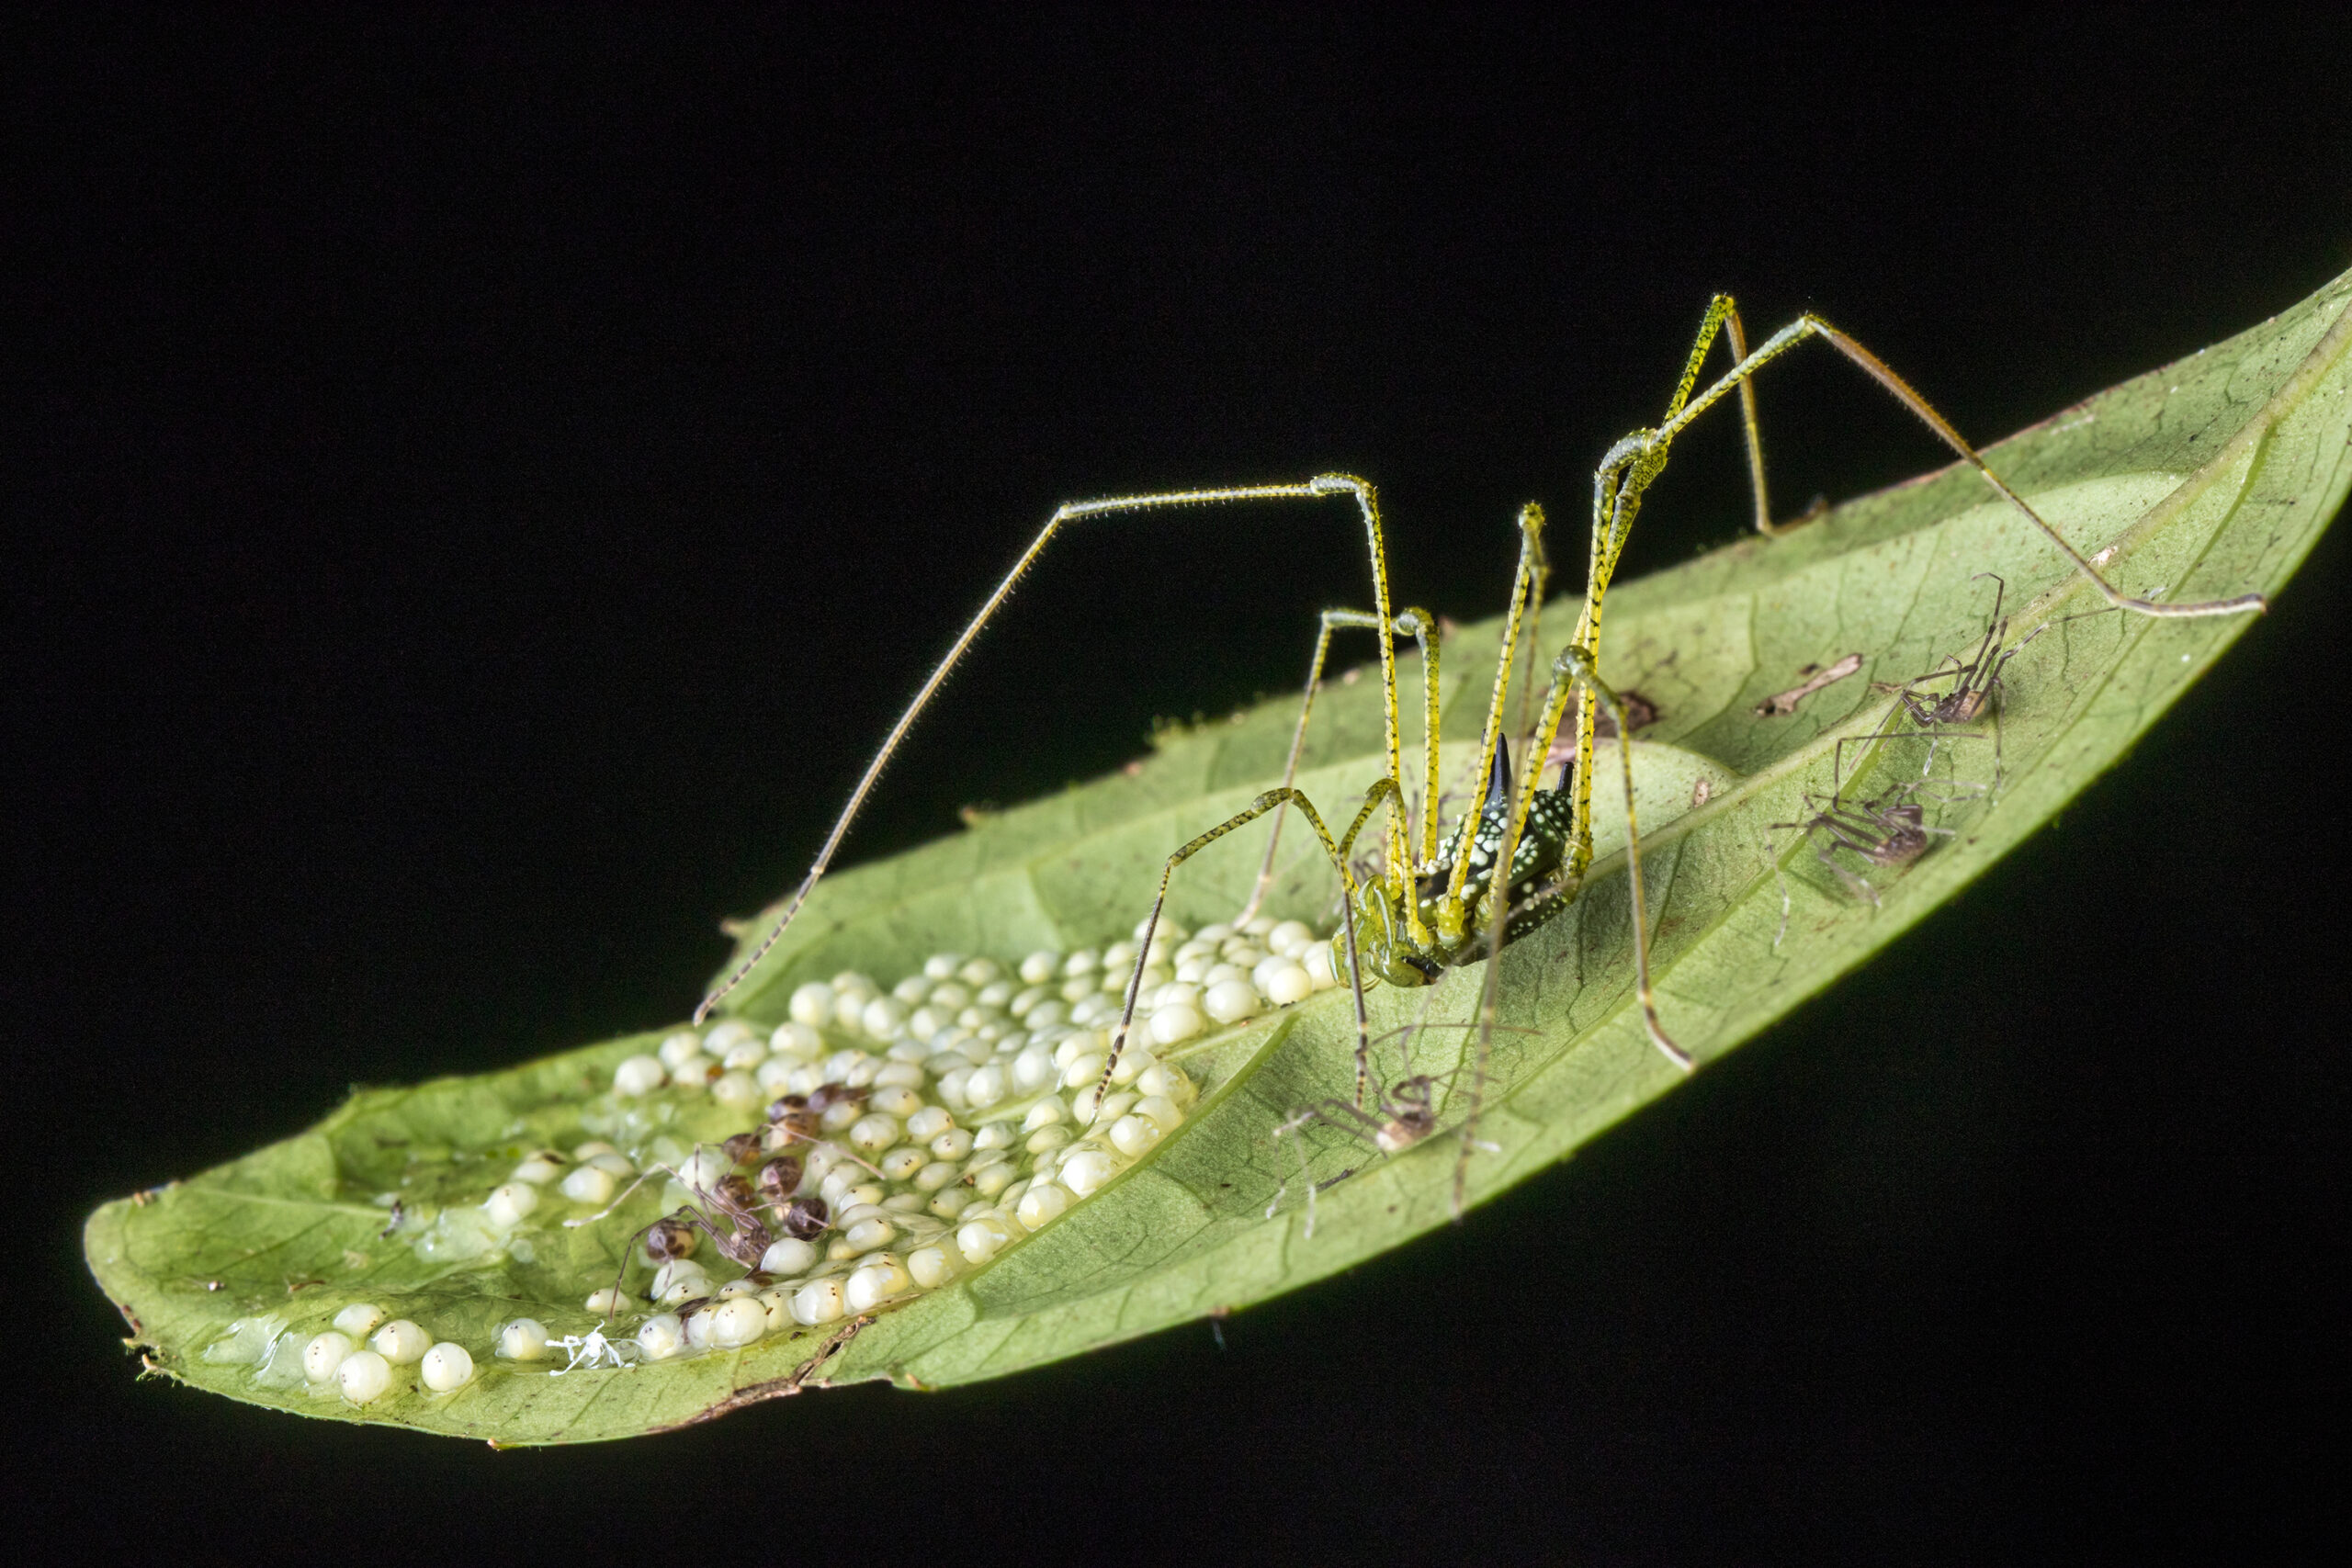 A daddy longlegs guards eggs on a leaf in the rain forest.